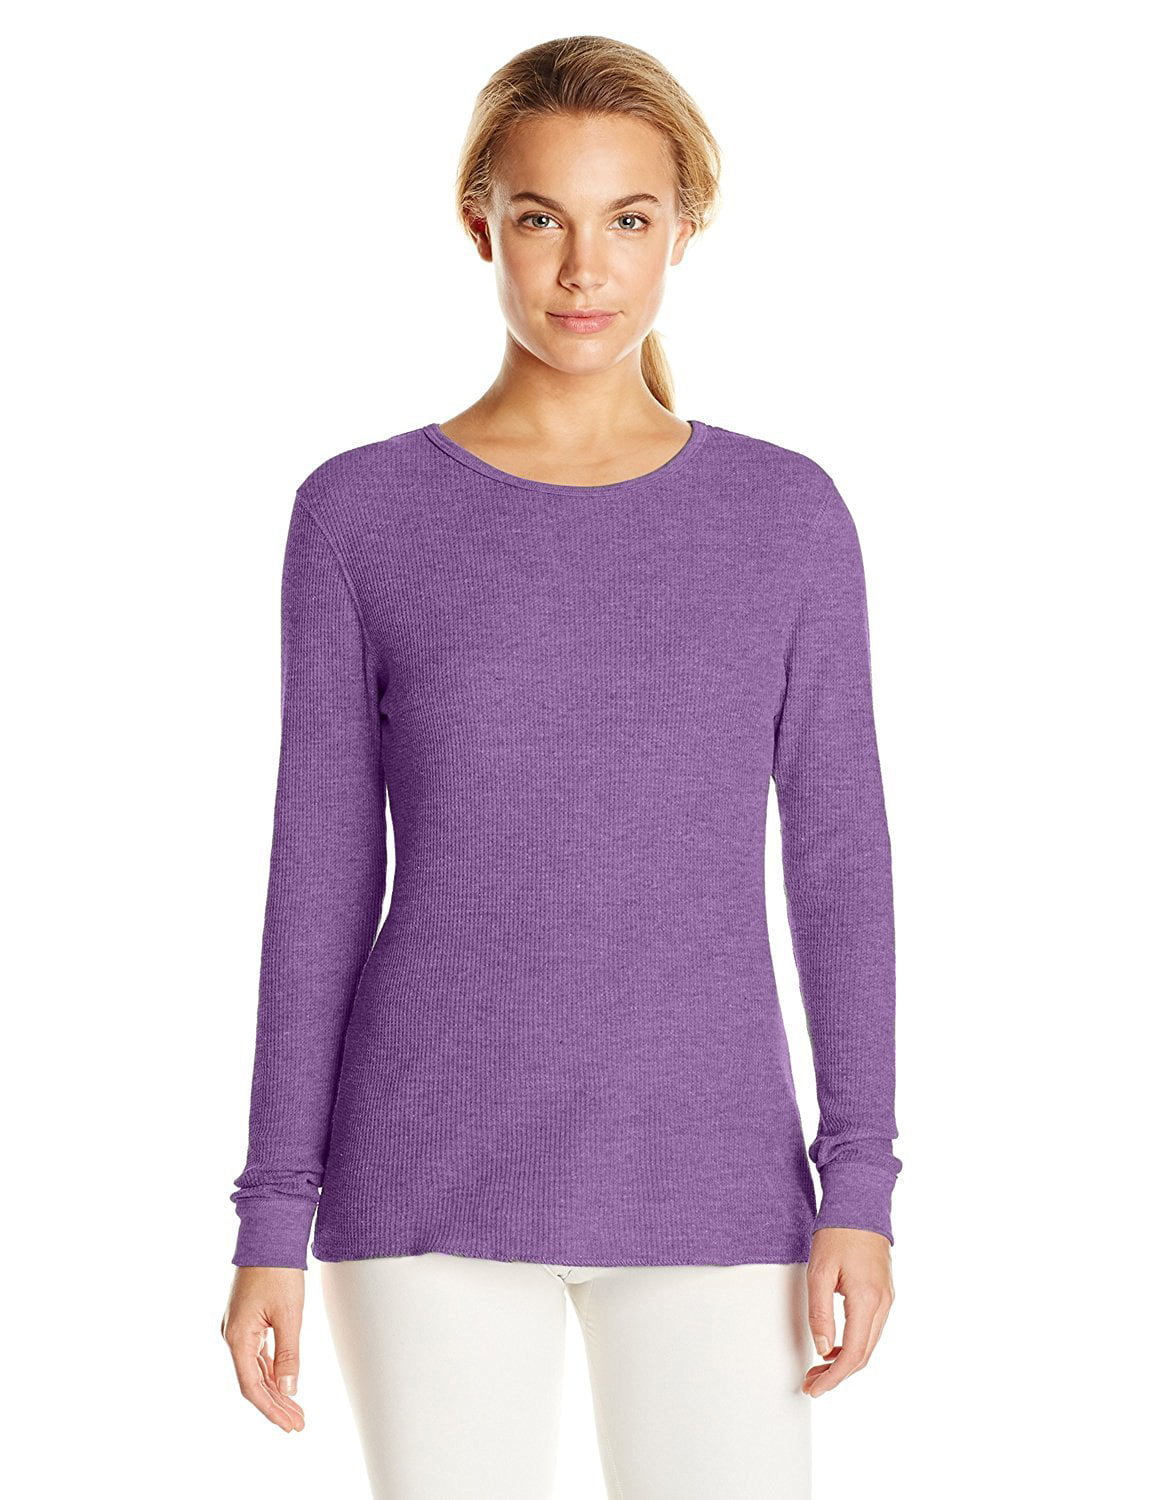 Hanes Women's Relaxed Fit Waffle Knit Thermal Crew | Hanes Thermals ...